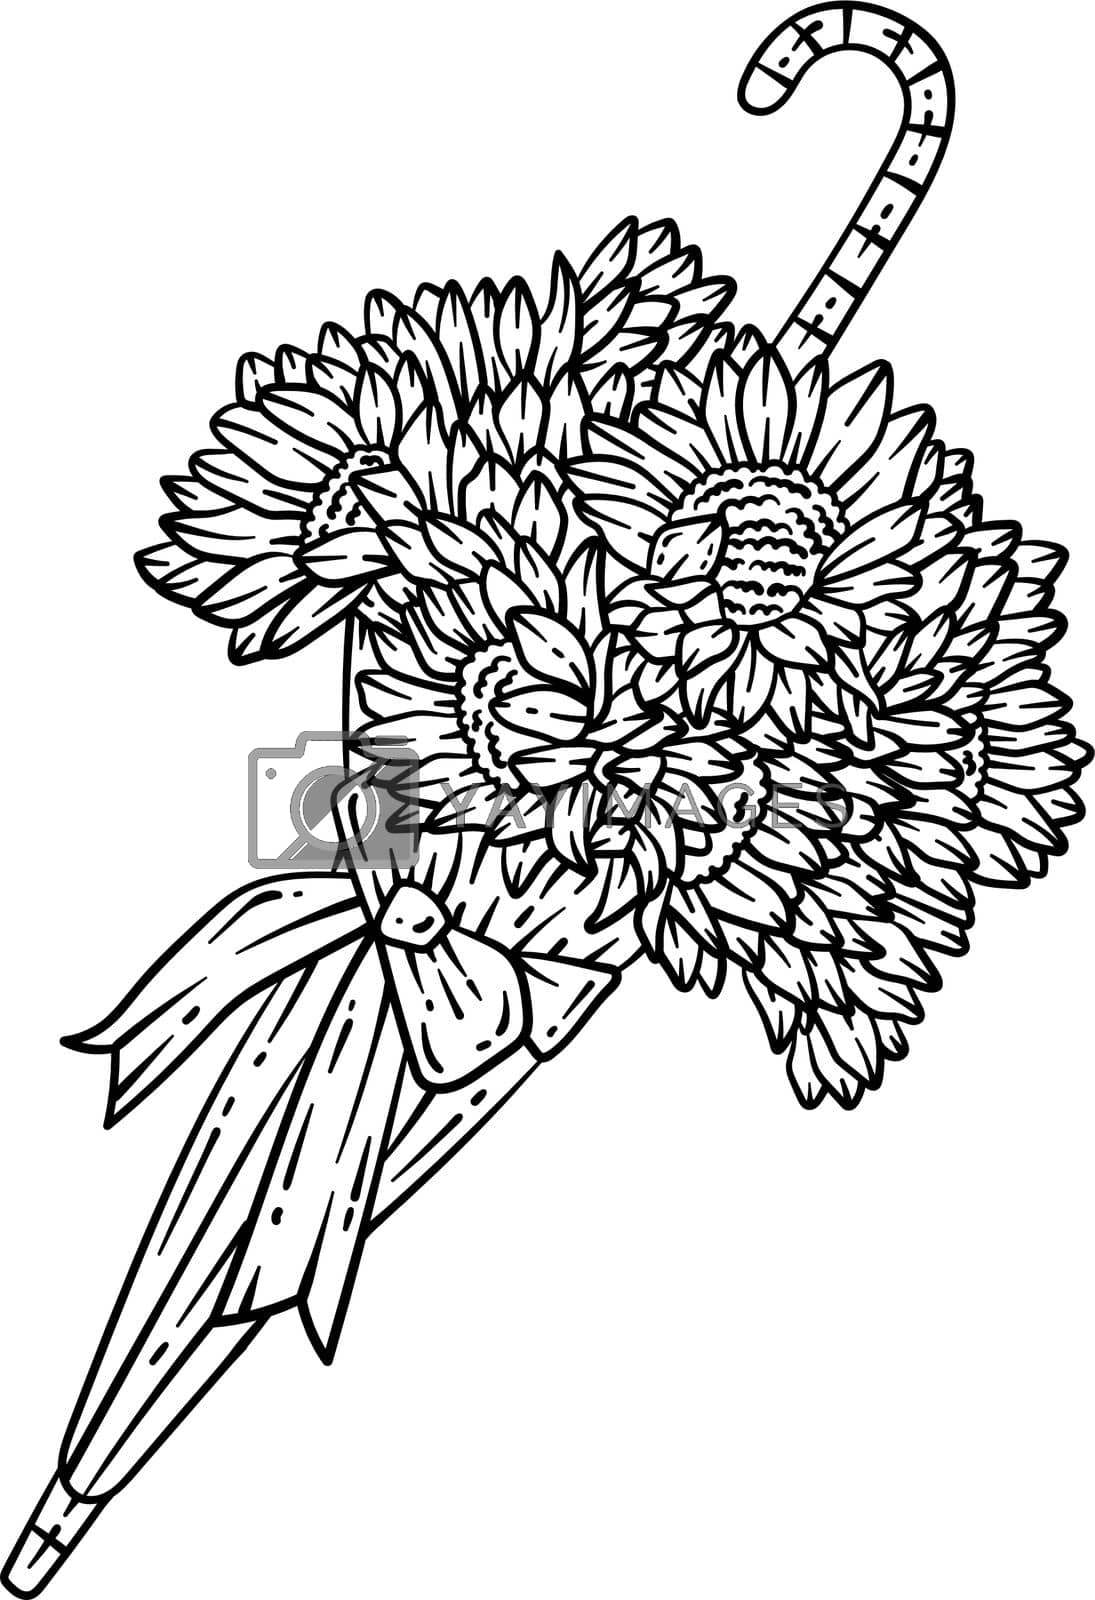 Royalty free image of Umbrella Flowers Spring Coloring Page for Adults by abbydesign